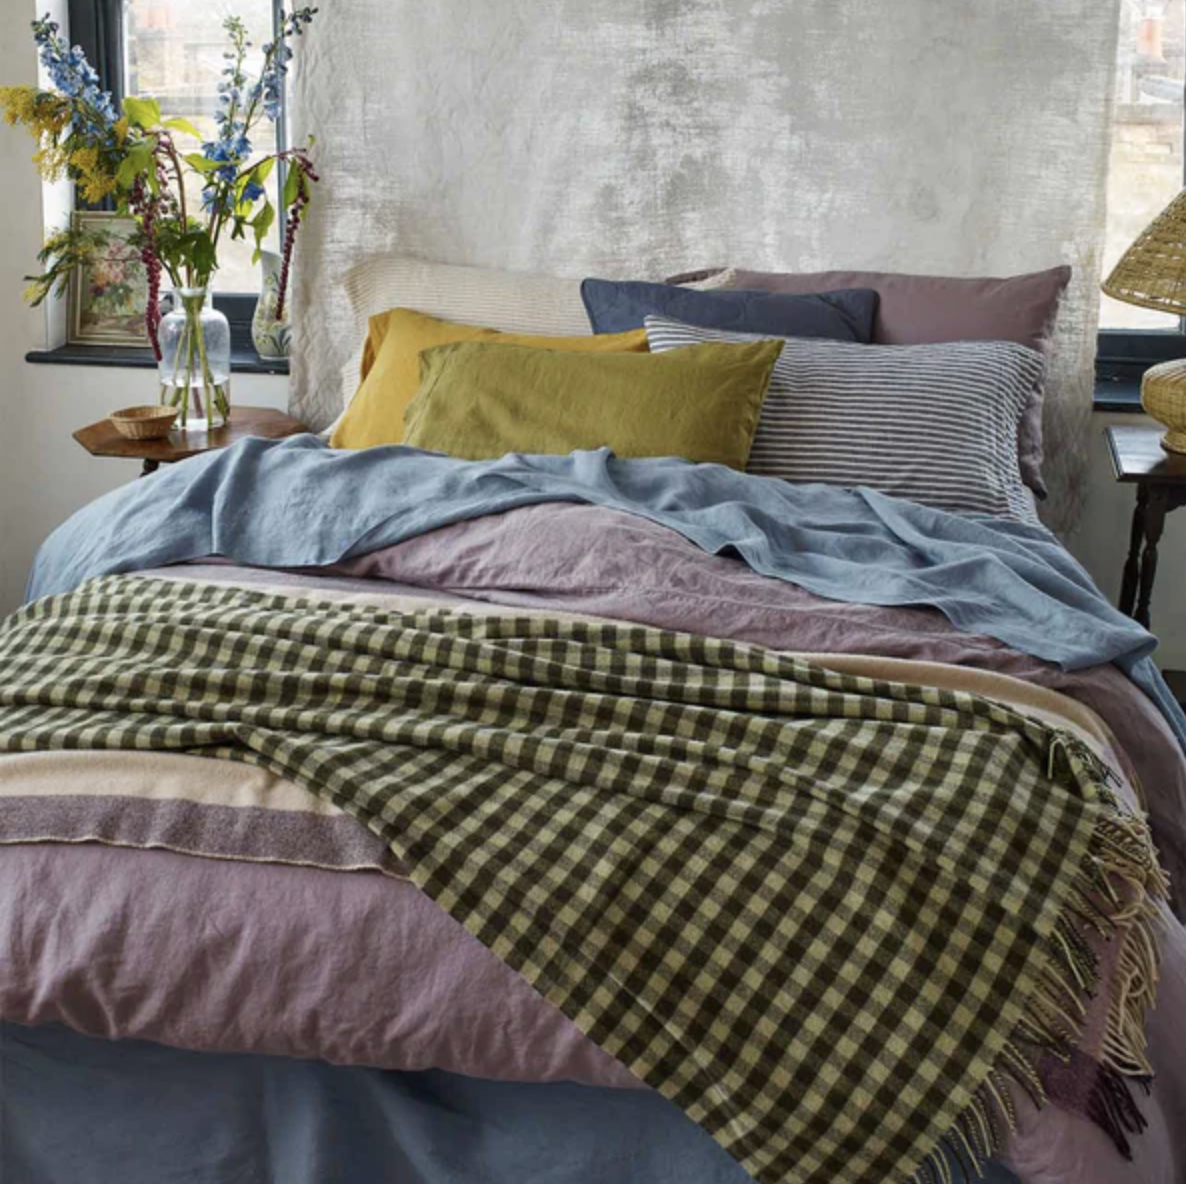 mix-and-match linen bedding in greens, purples, and blues